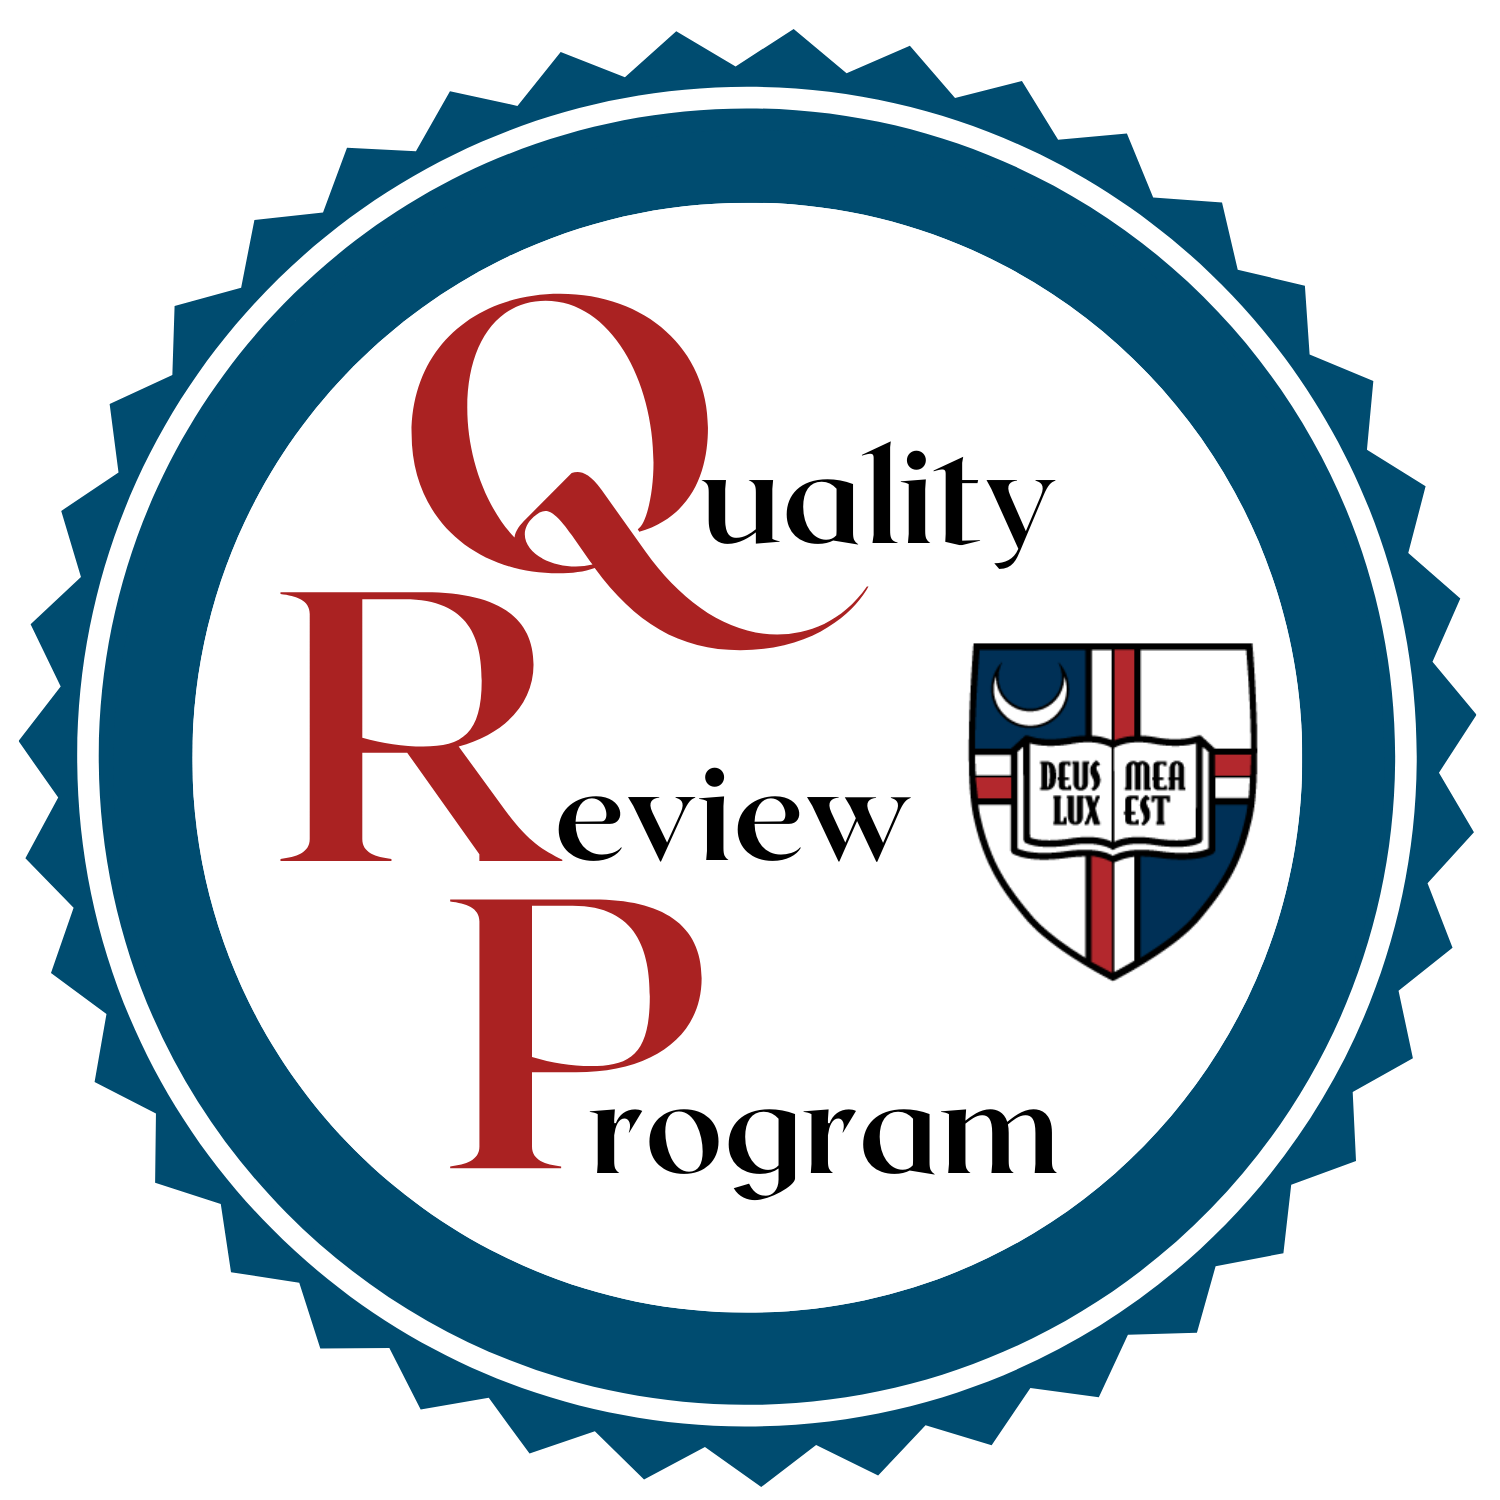 Emblem in CUA colors saying Quality Review Program